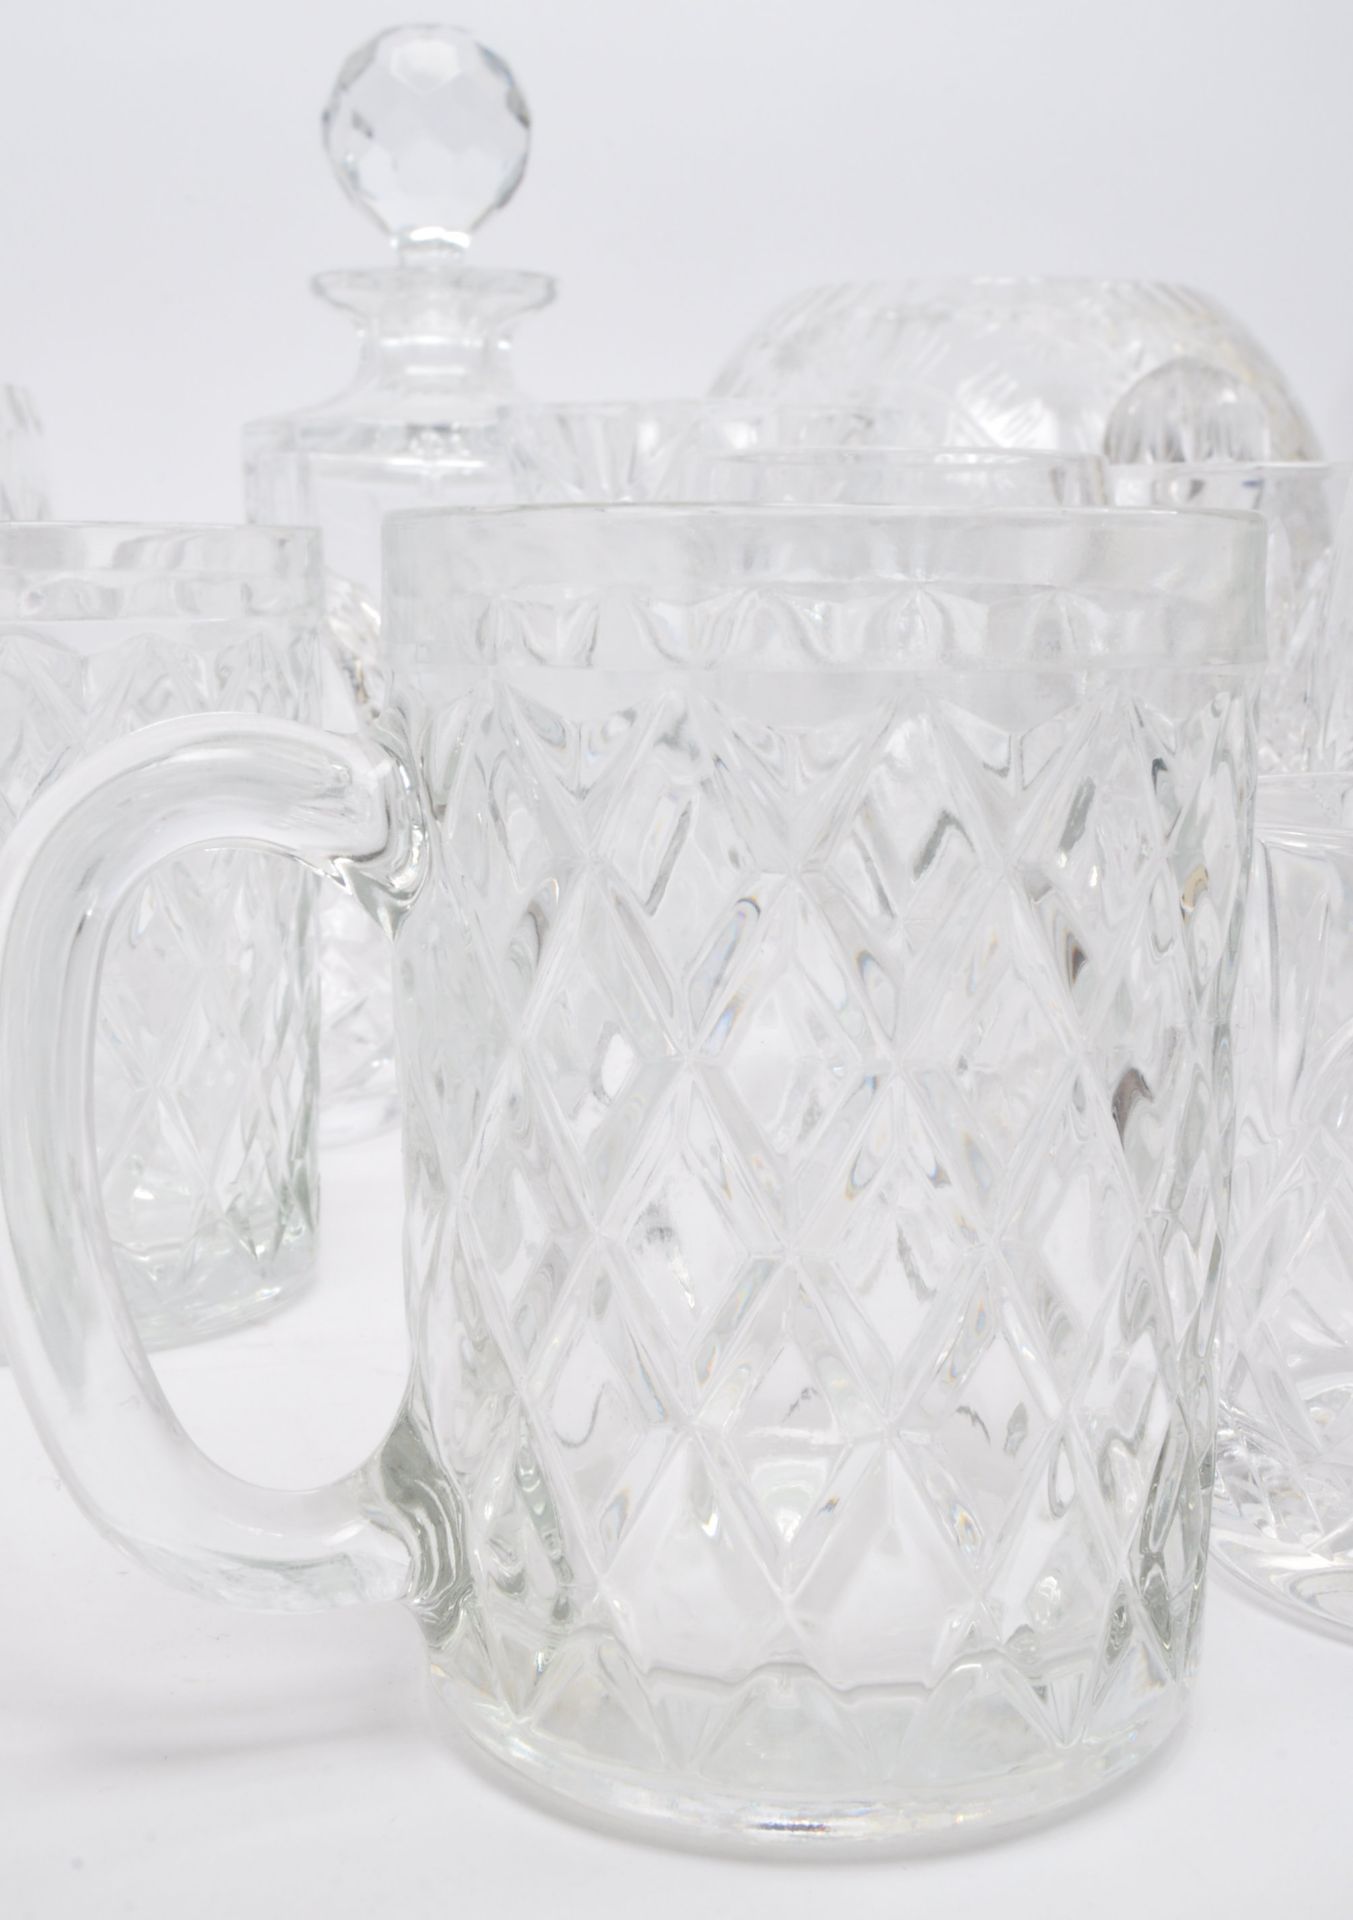 LARGE COLLECTION OF VINTAGE CUT GLASS ITEMS - Image 5 of 6